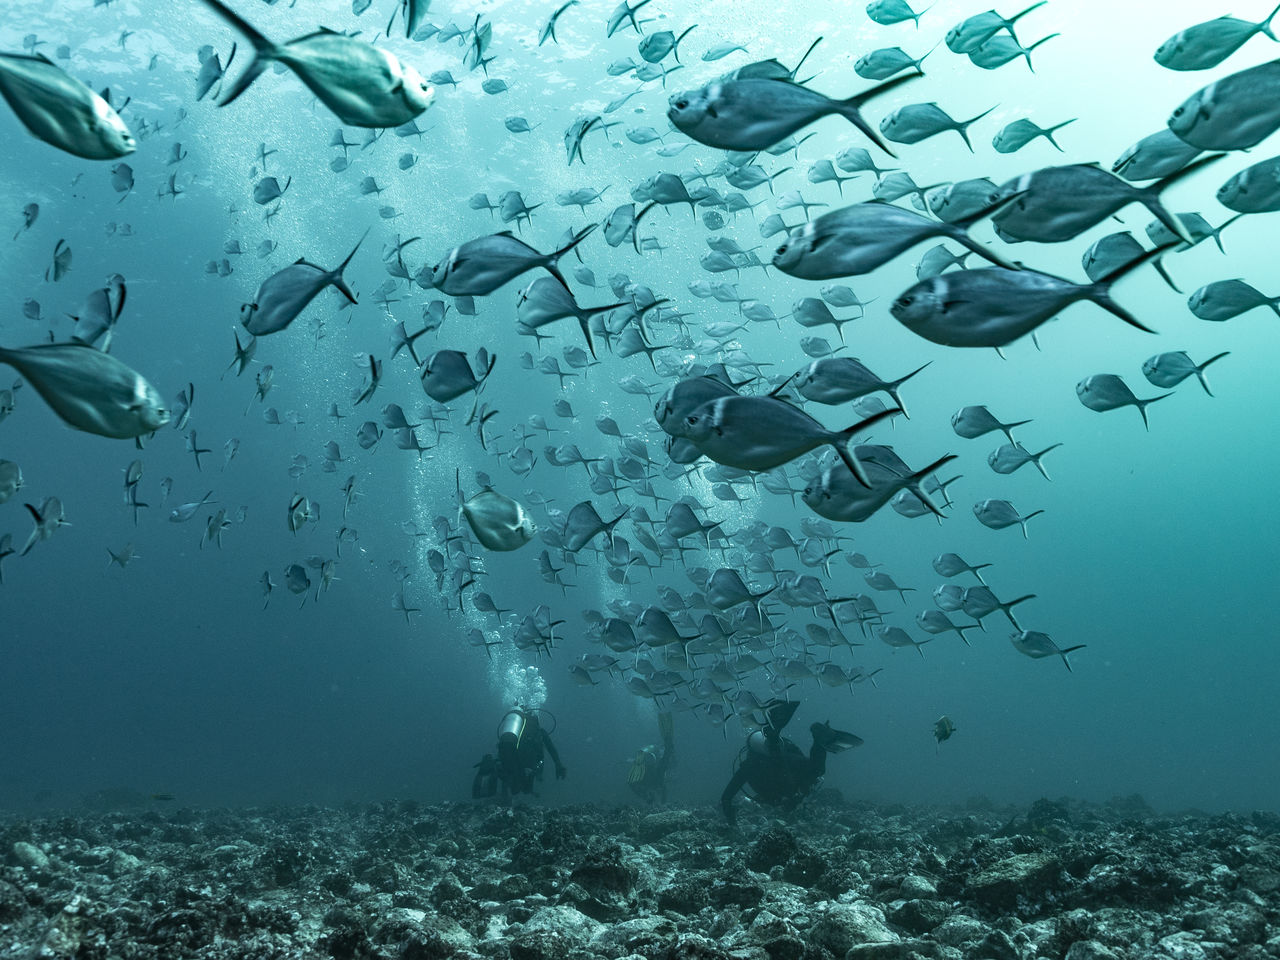 People scuba diving by school of fish in sea